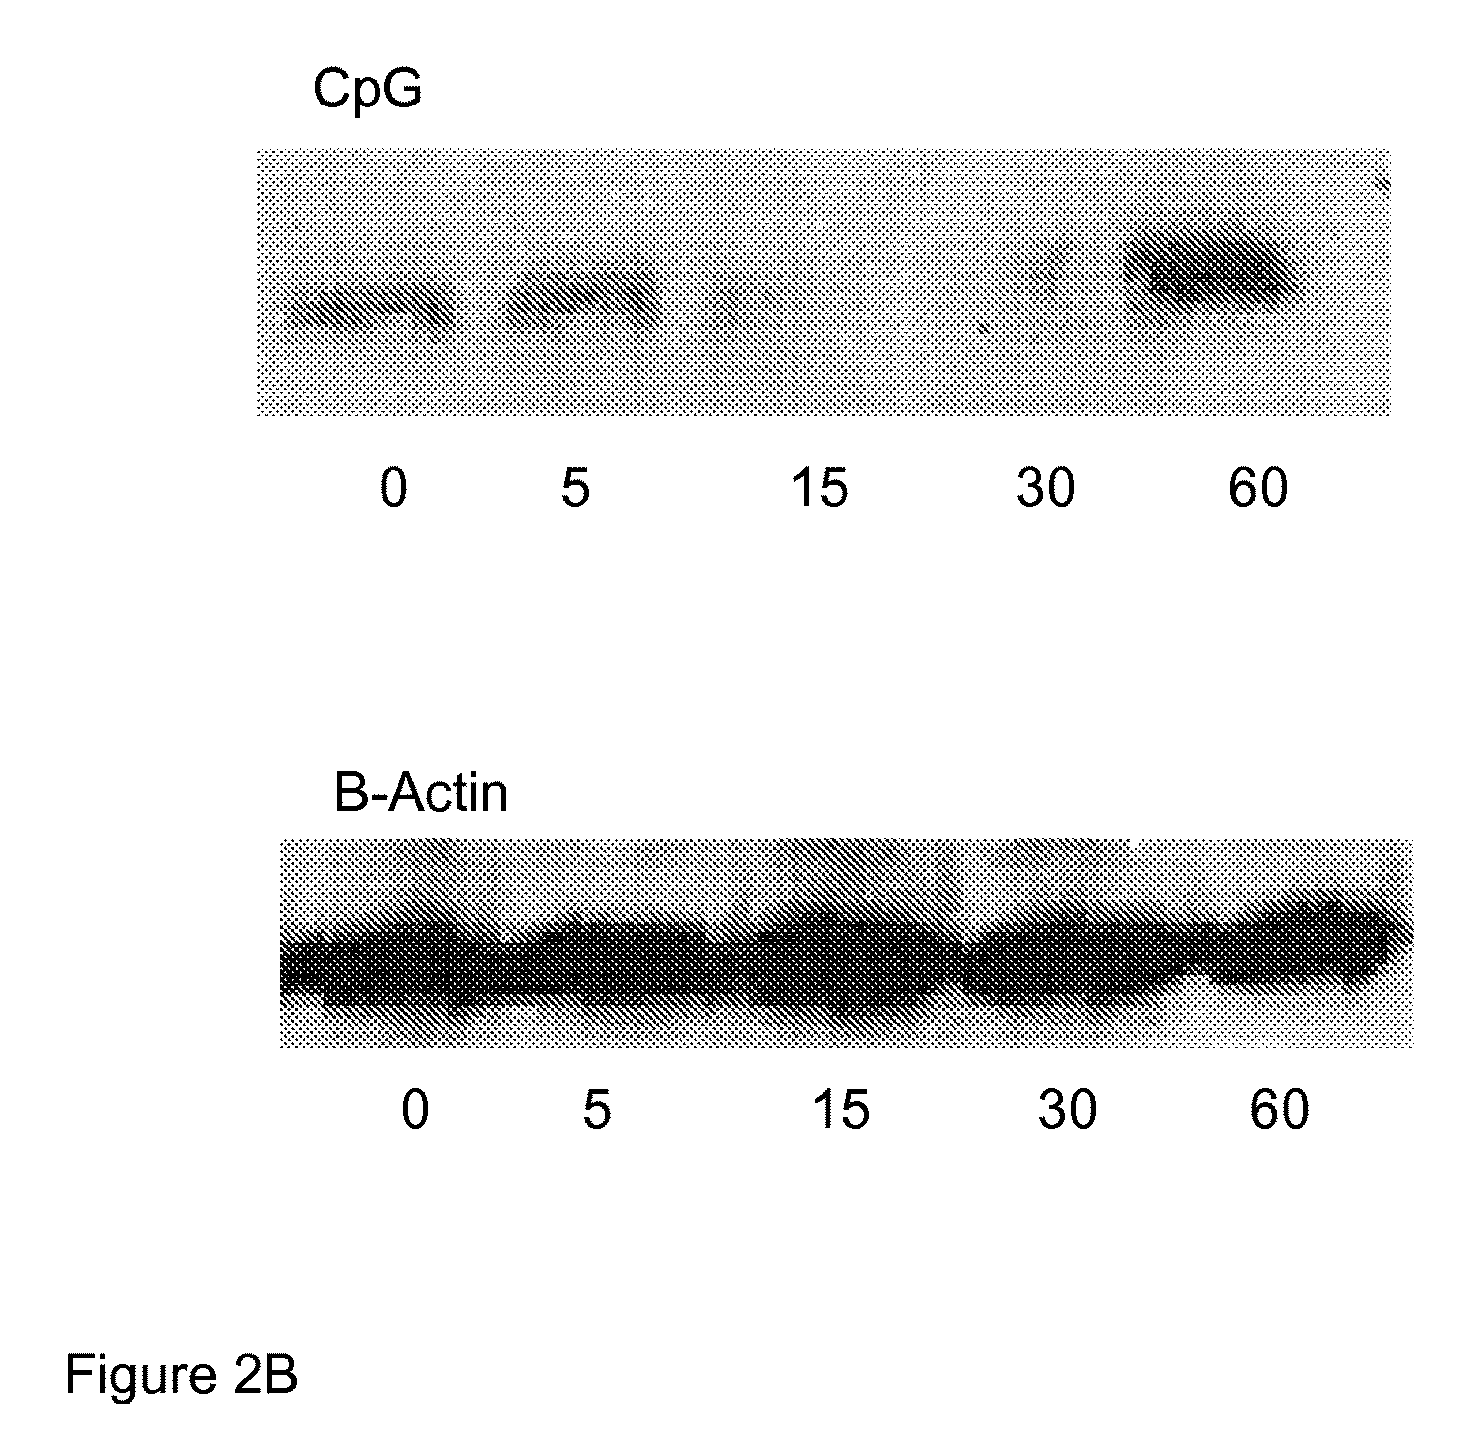 Composition and method for treatment of preterm labor